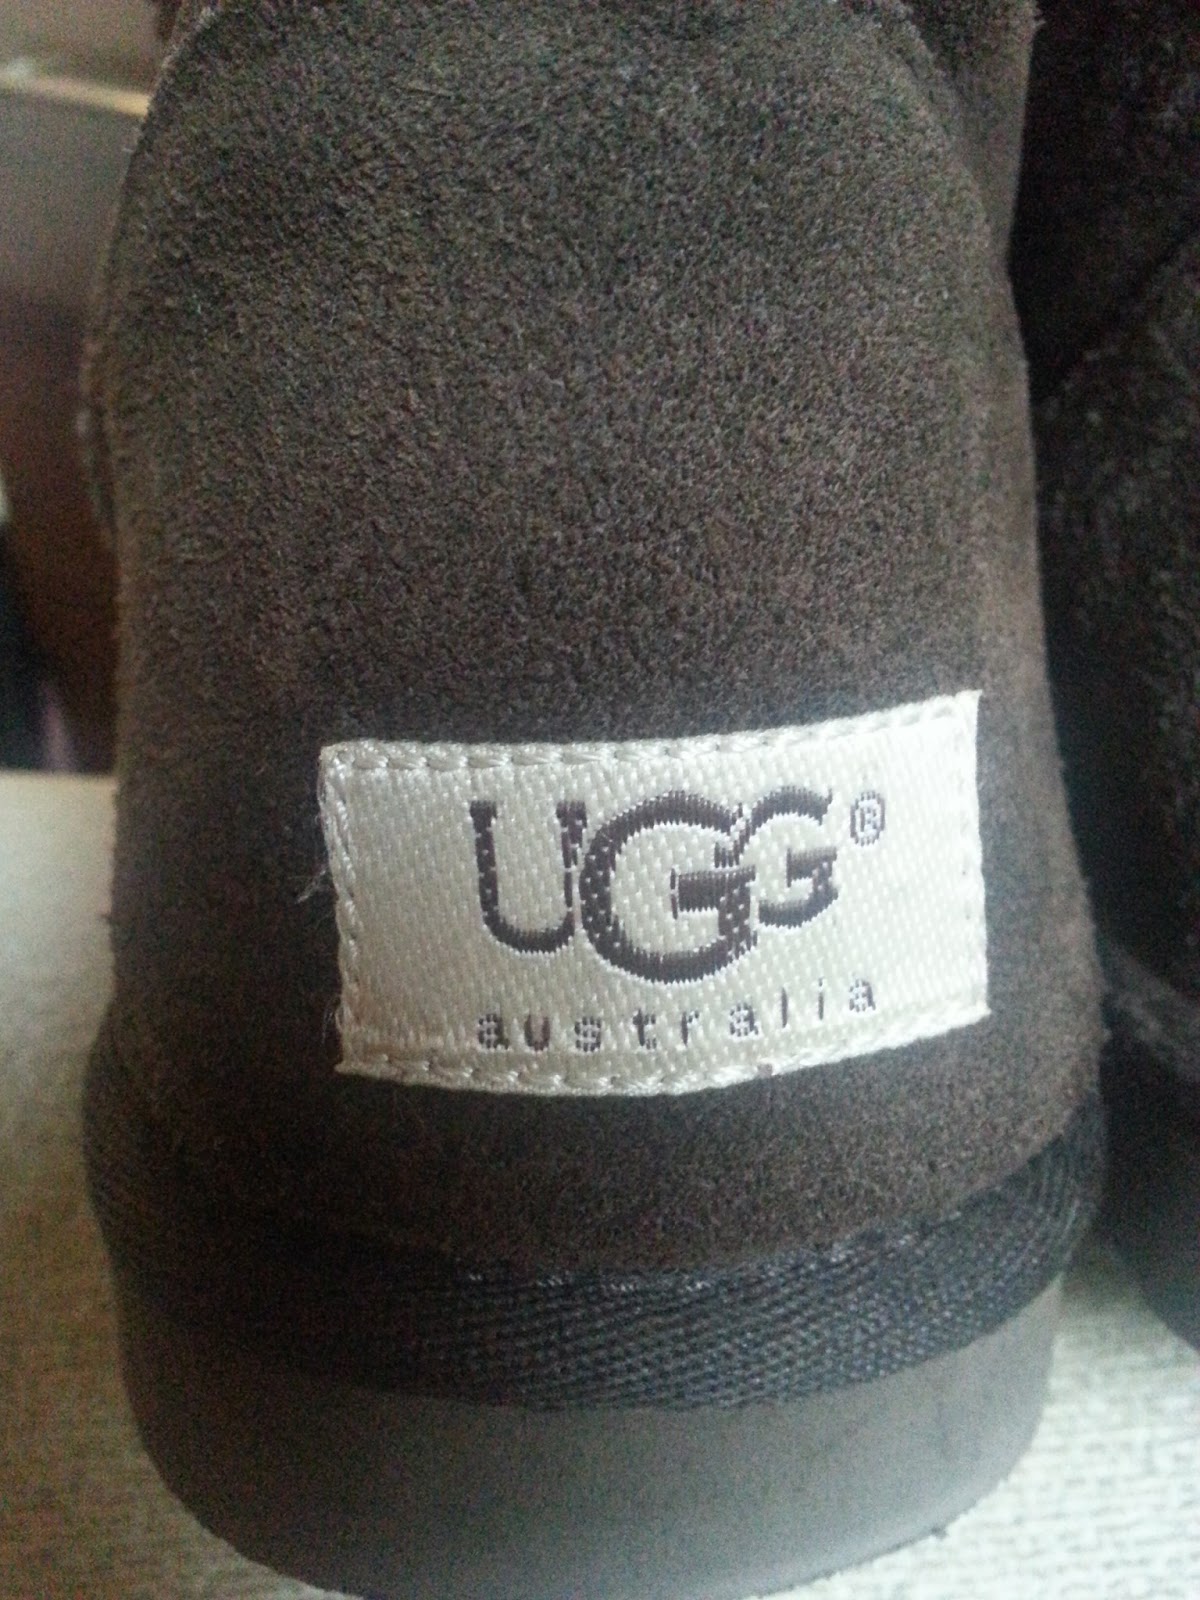 Forget Moi Knots: Ugg boots, genuine or fake?? - How to spot a fake.